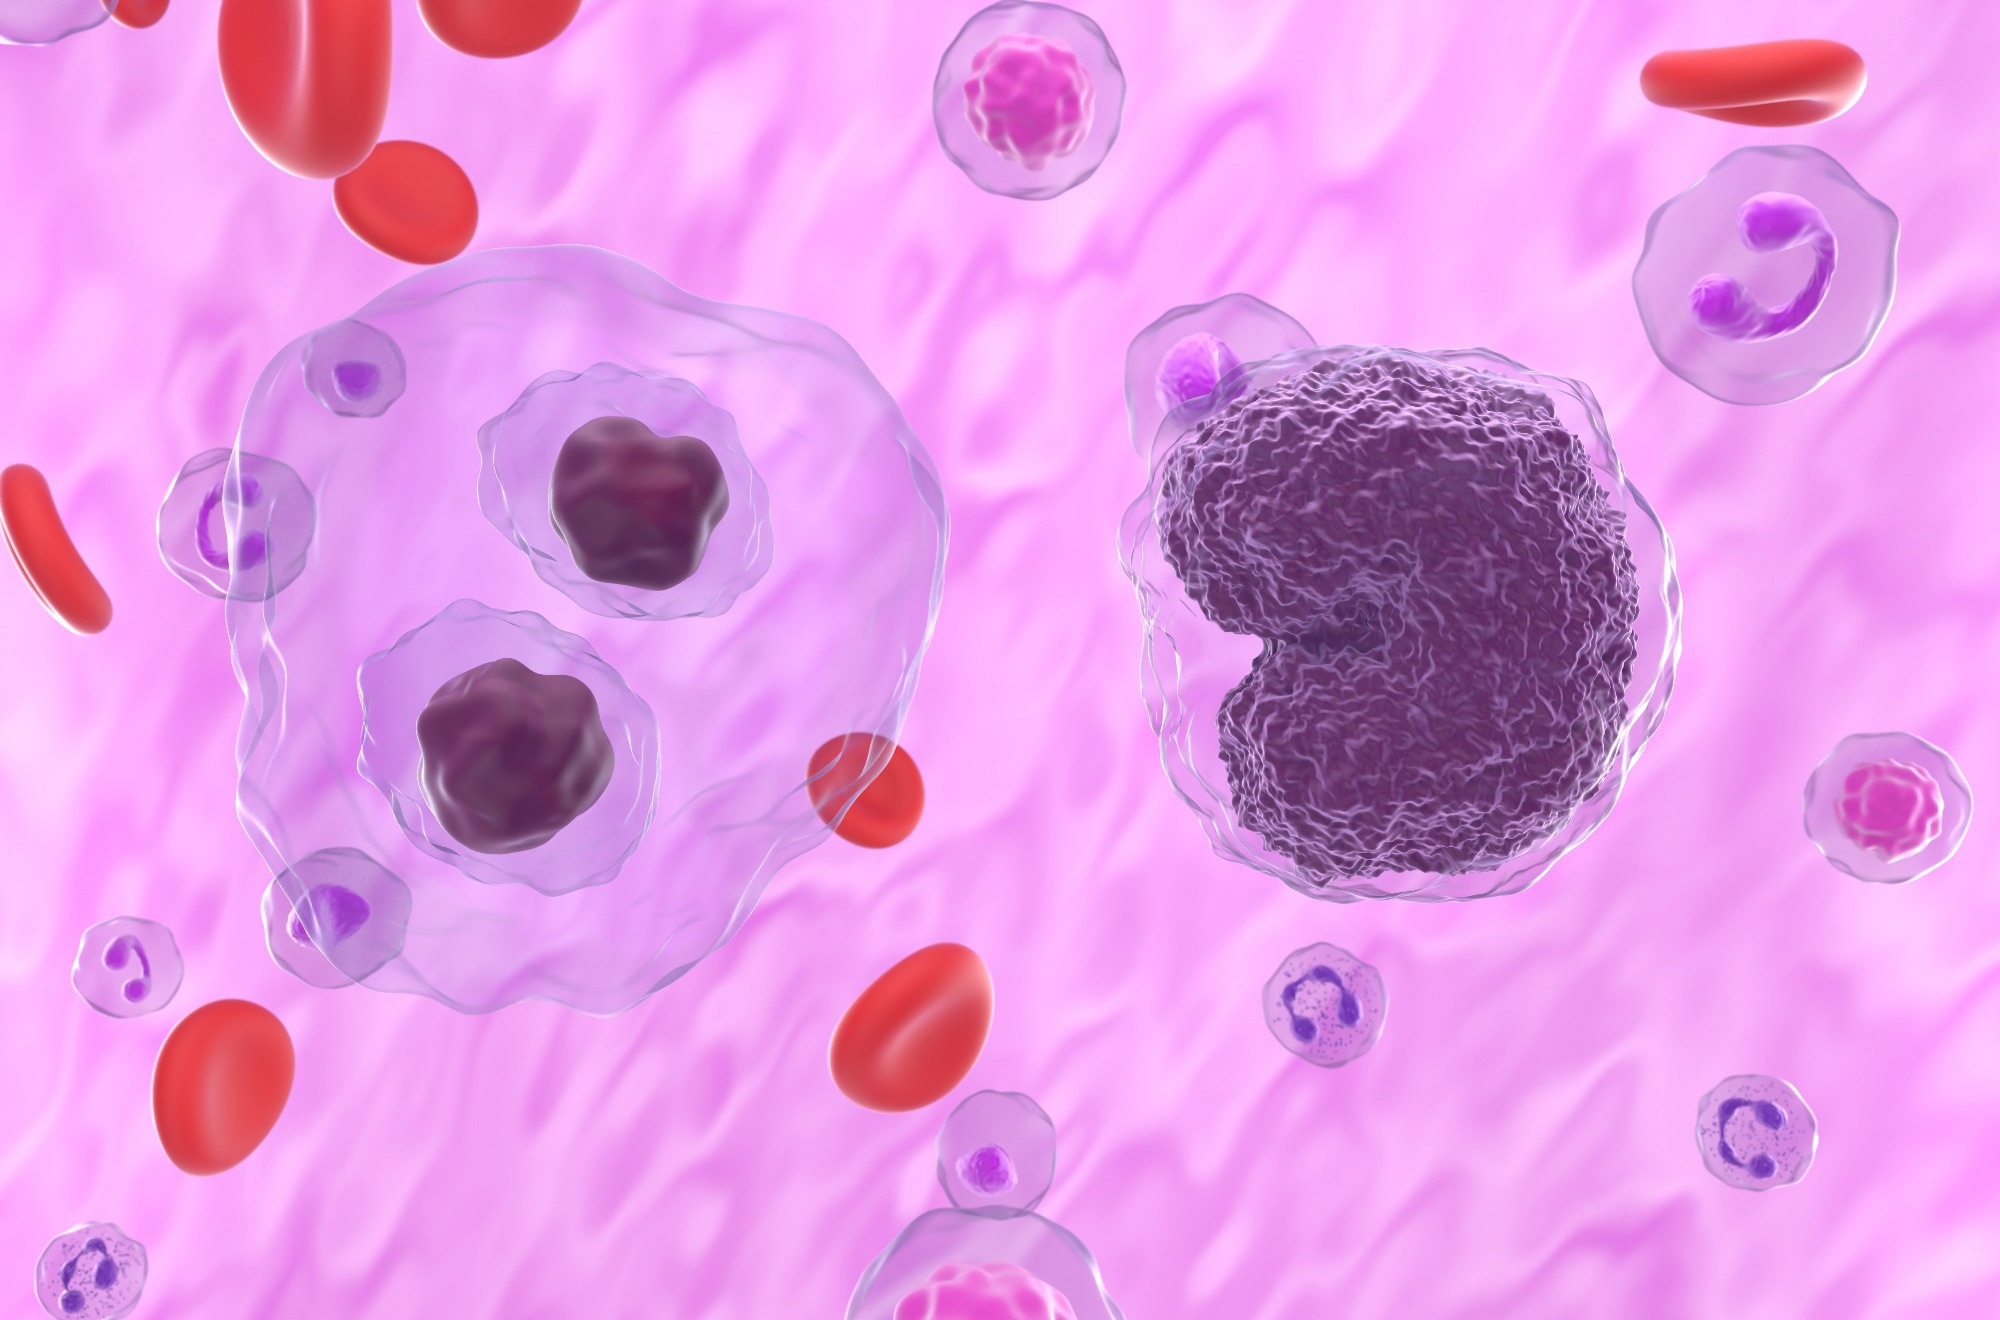 Study: Diagnosis and management of classical Hodgkin lymphomaduring the COVID-19 pandemic. Image Credit: Nemes Laszlo/Shutterstock